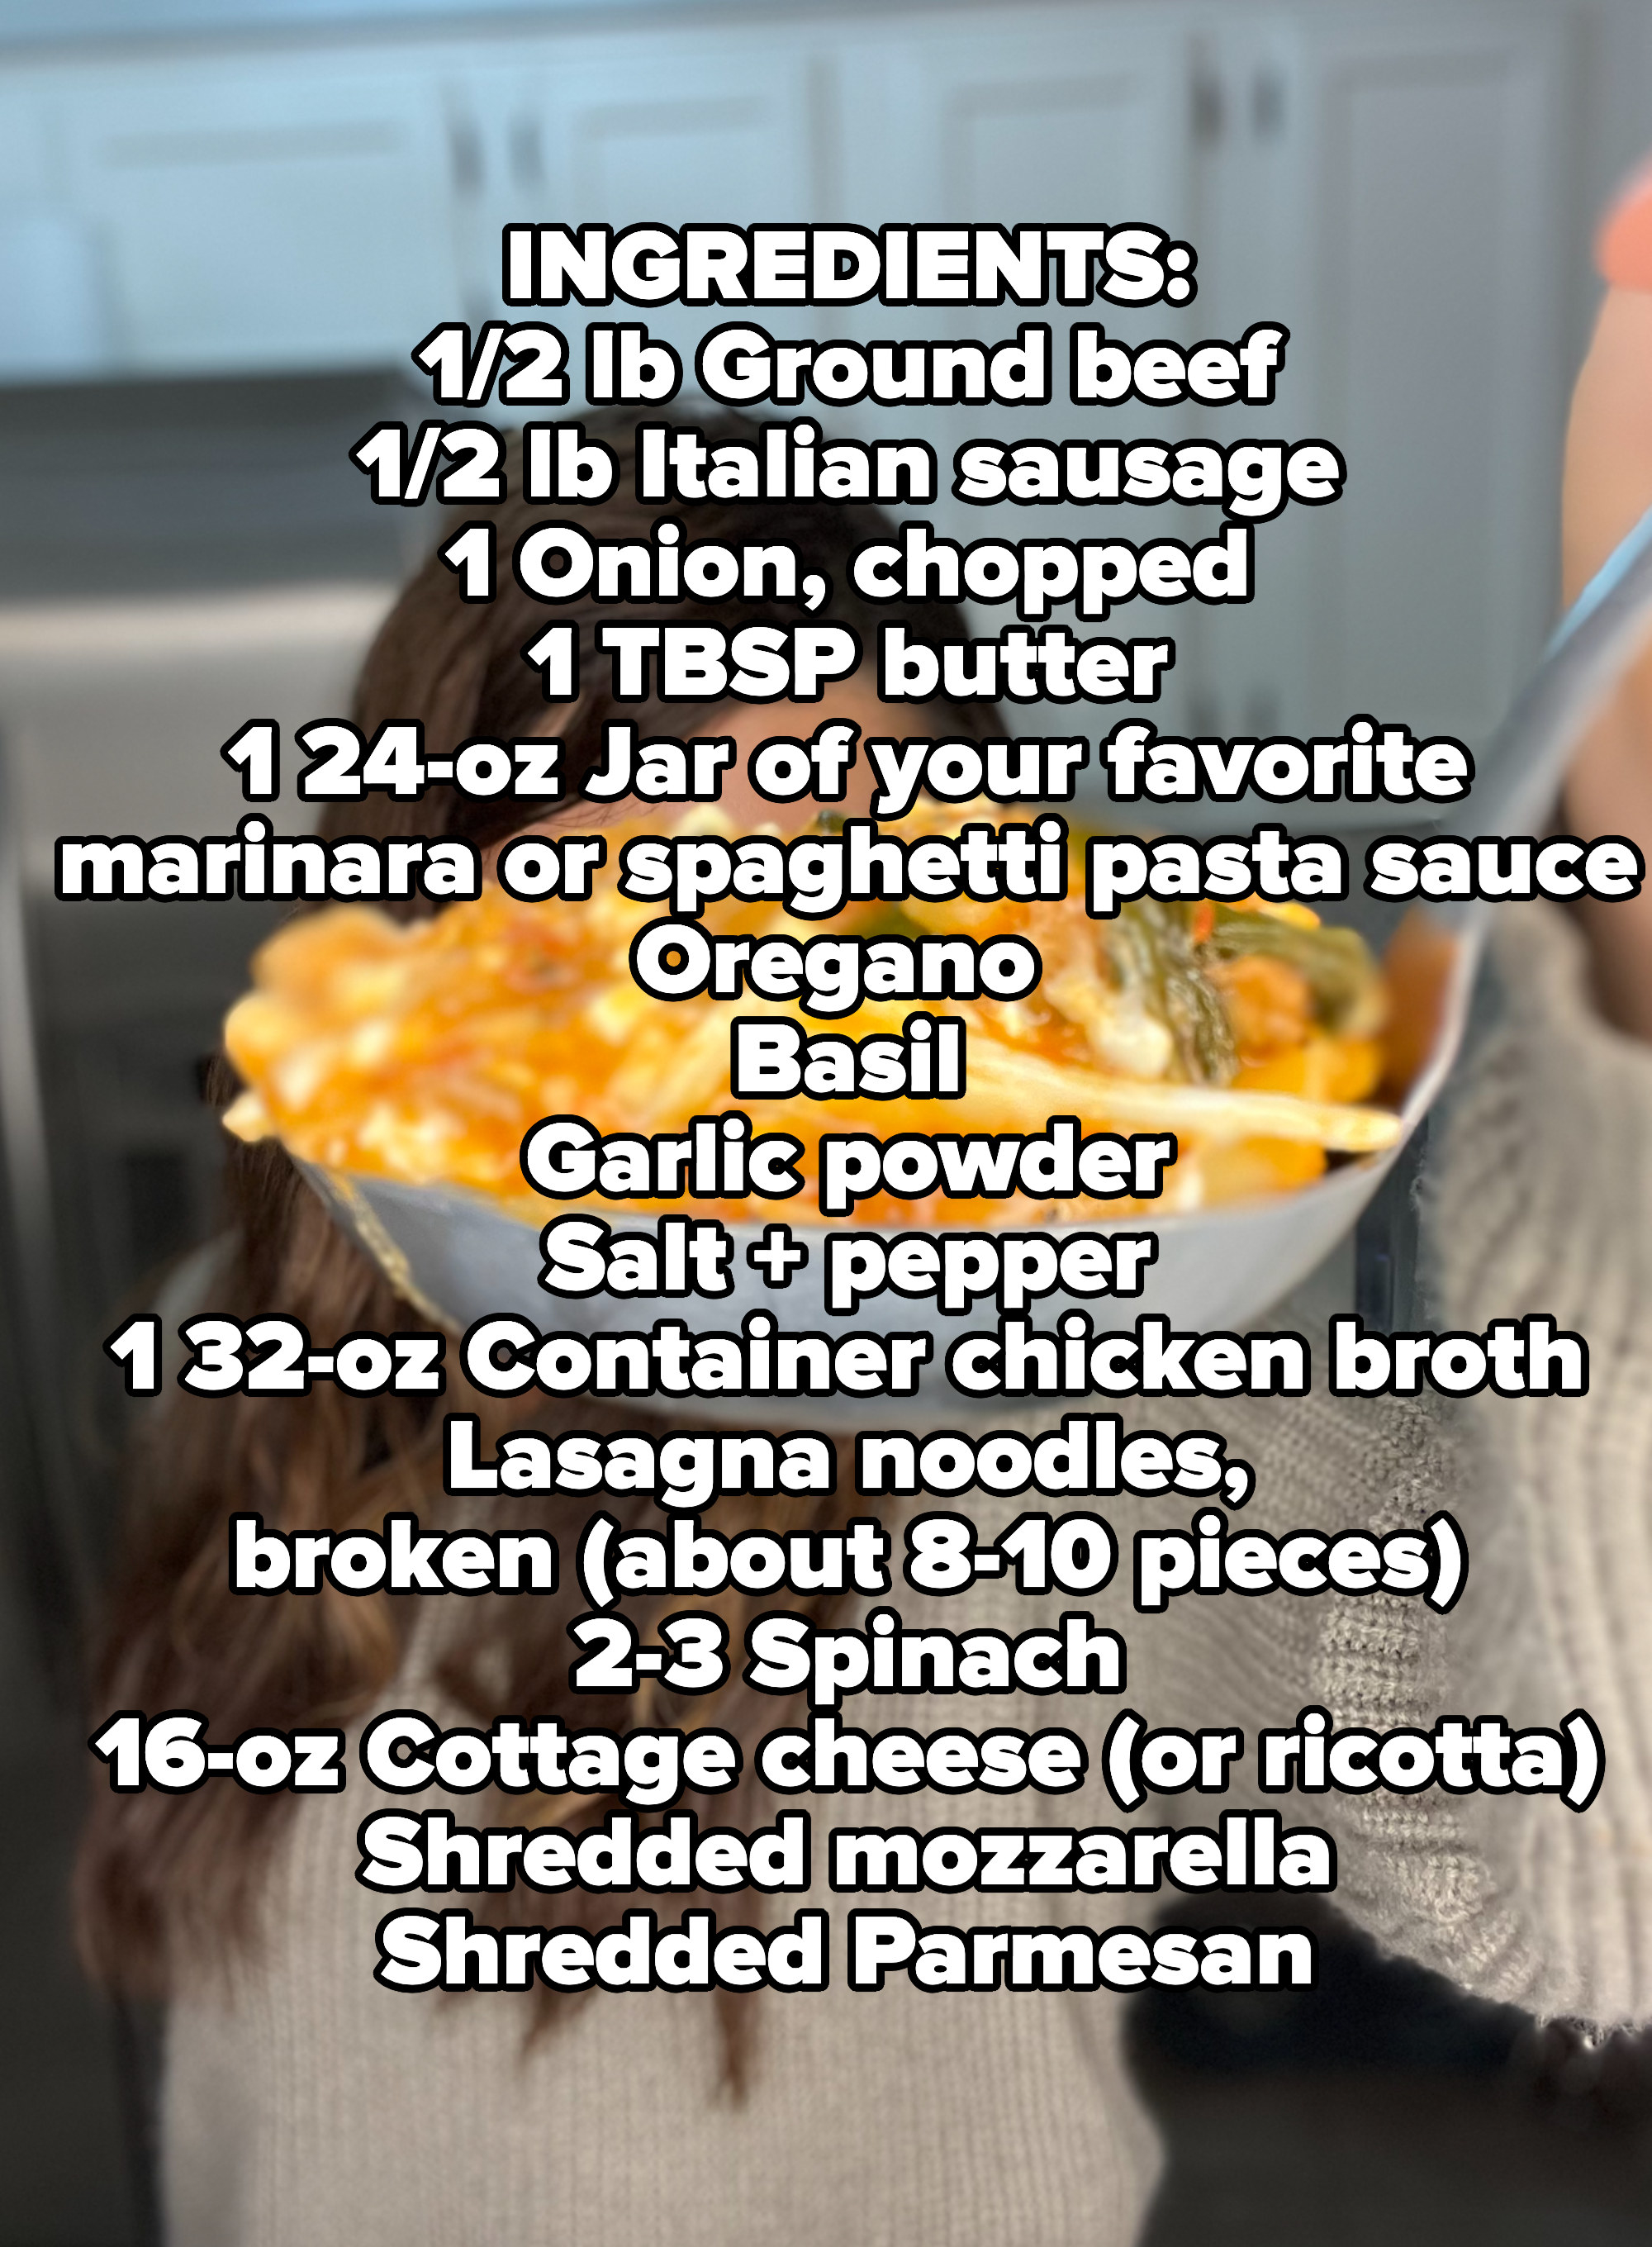 A list of the ingredients